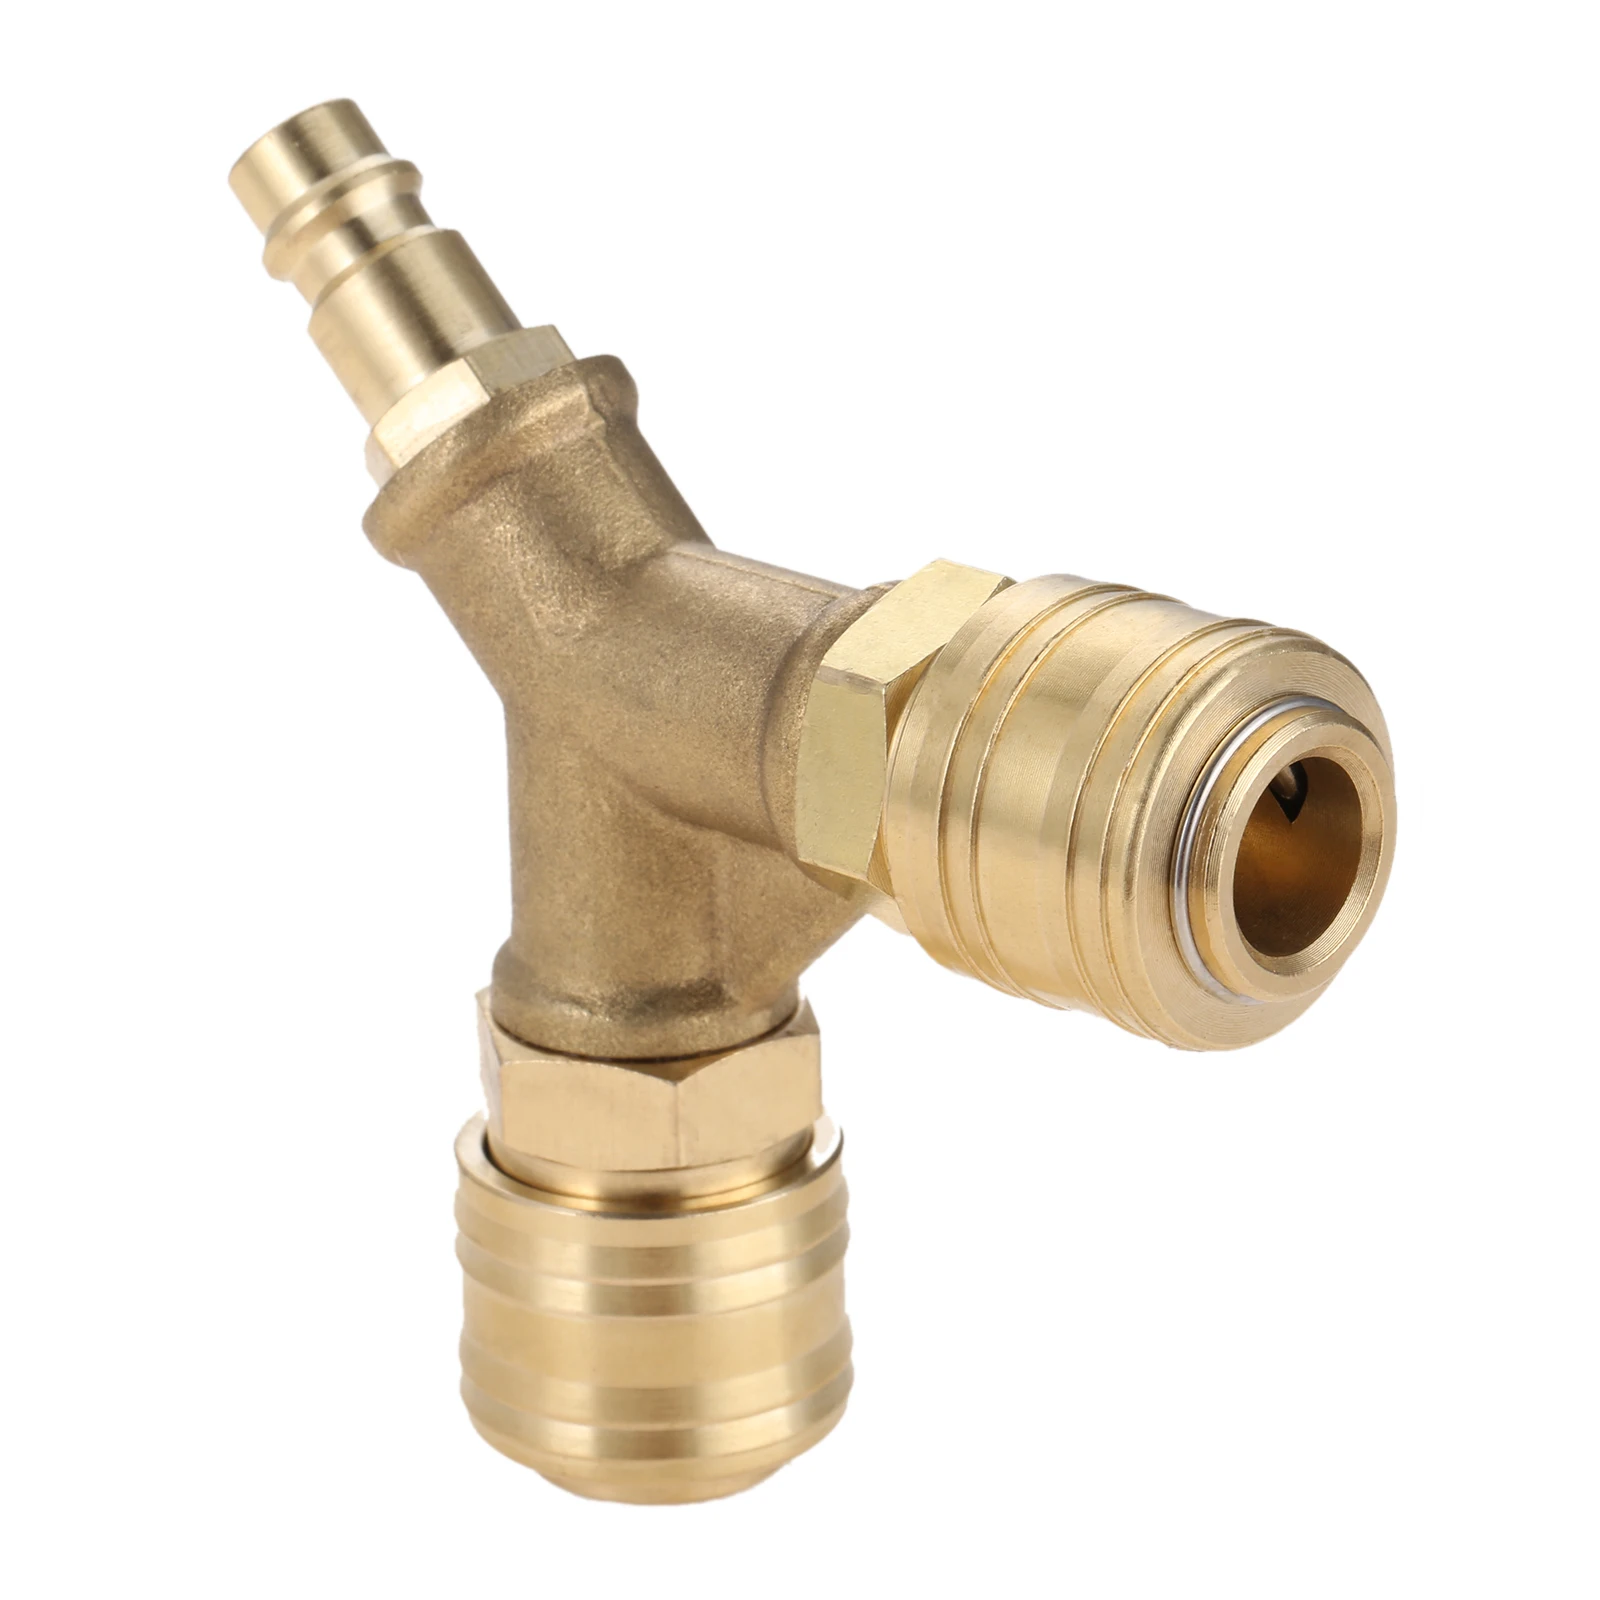 1set Brass Compressed Air Distributor 1/4 Inch 2-Way Y-shape Connection Male Thread Plug Connector Switch Hose Fitting NW 7.2